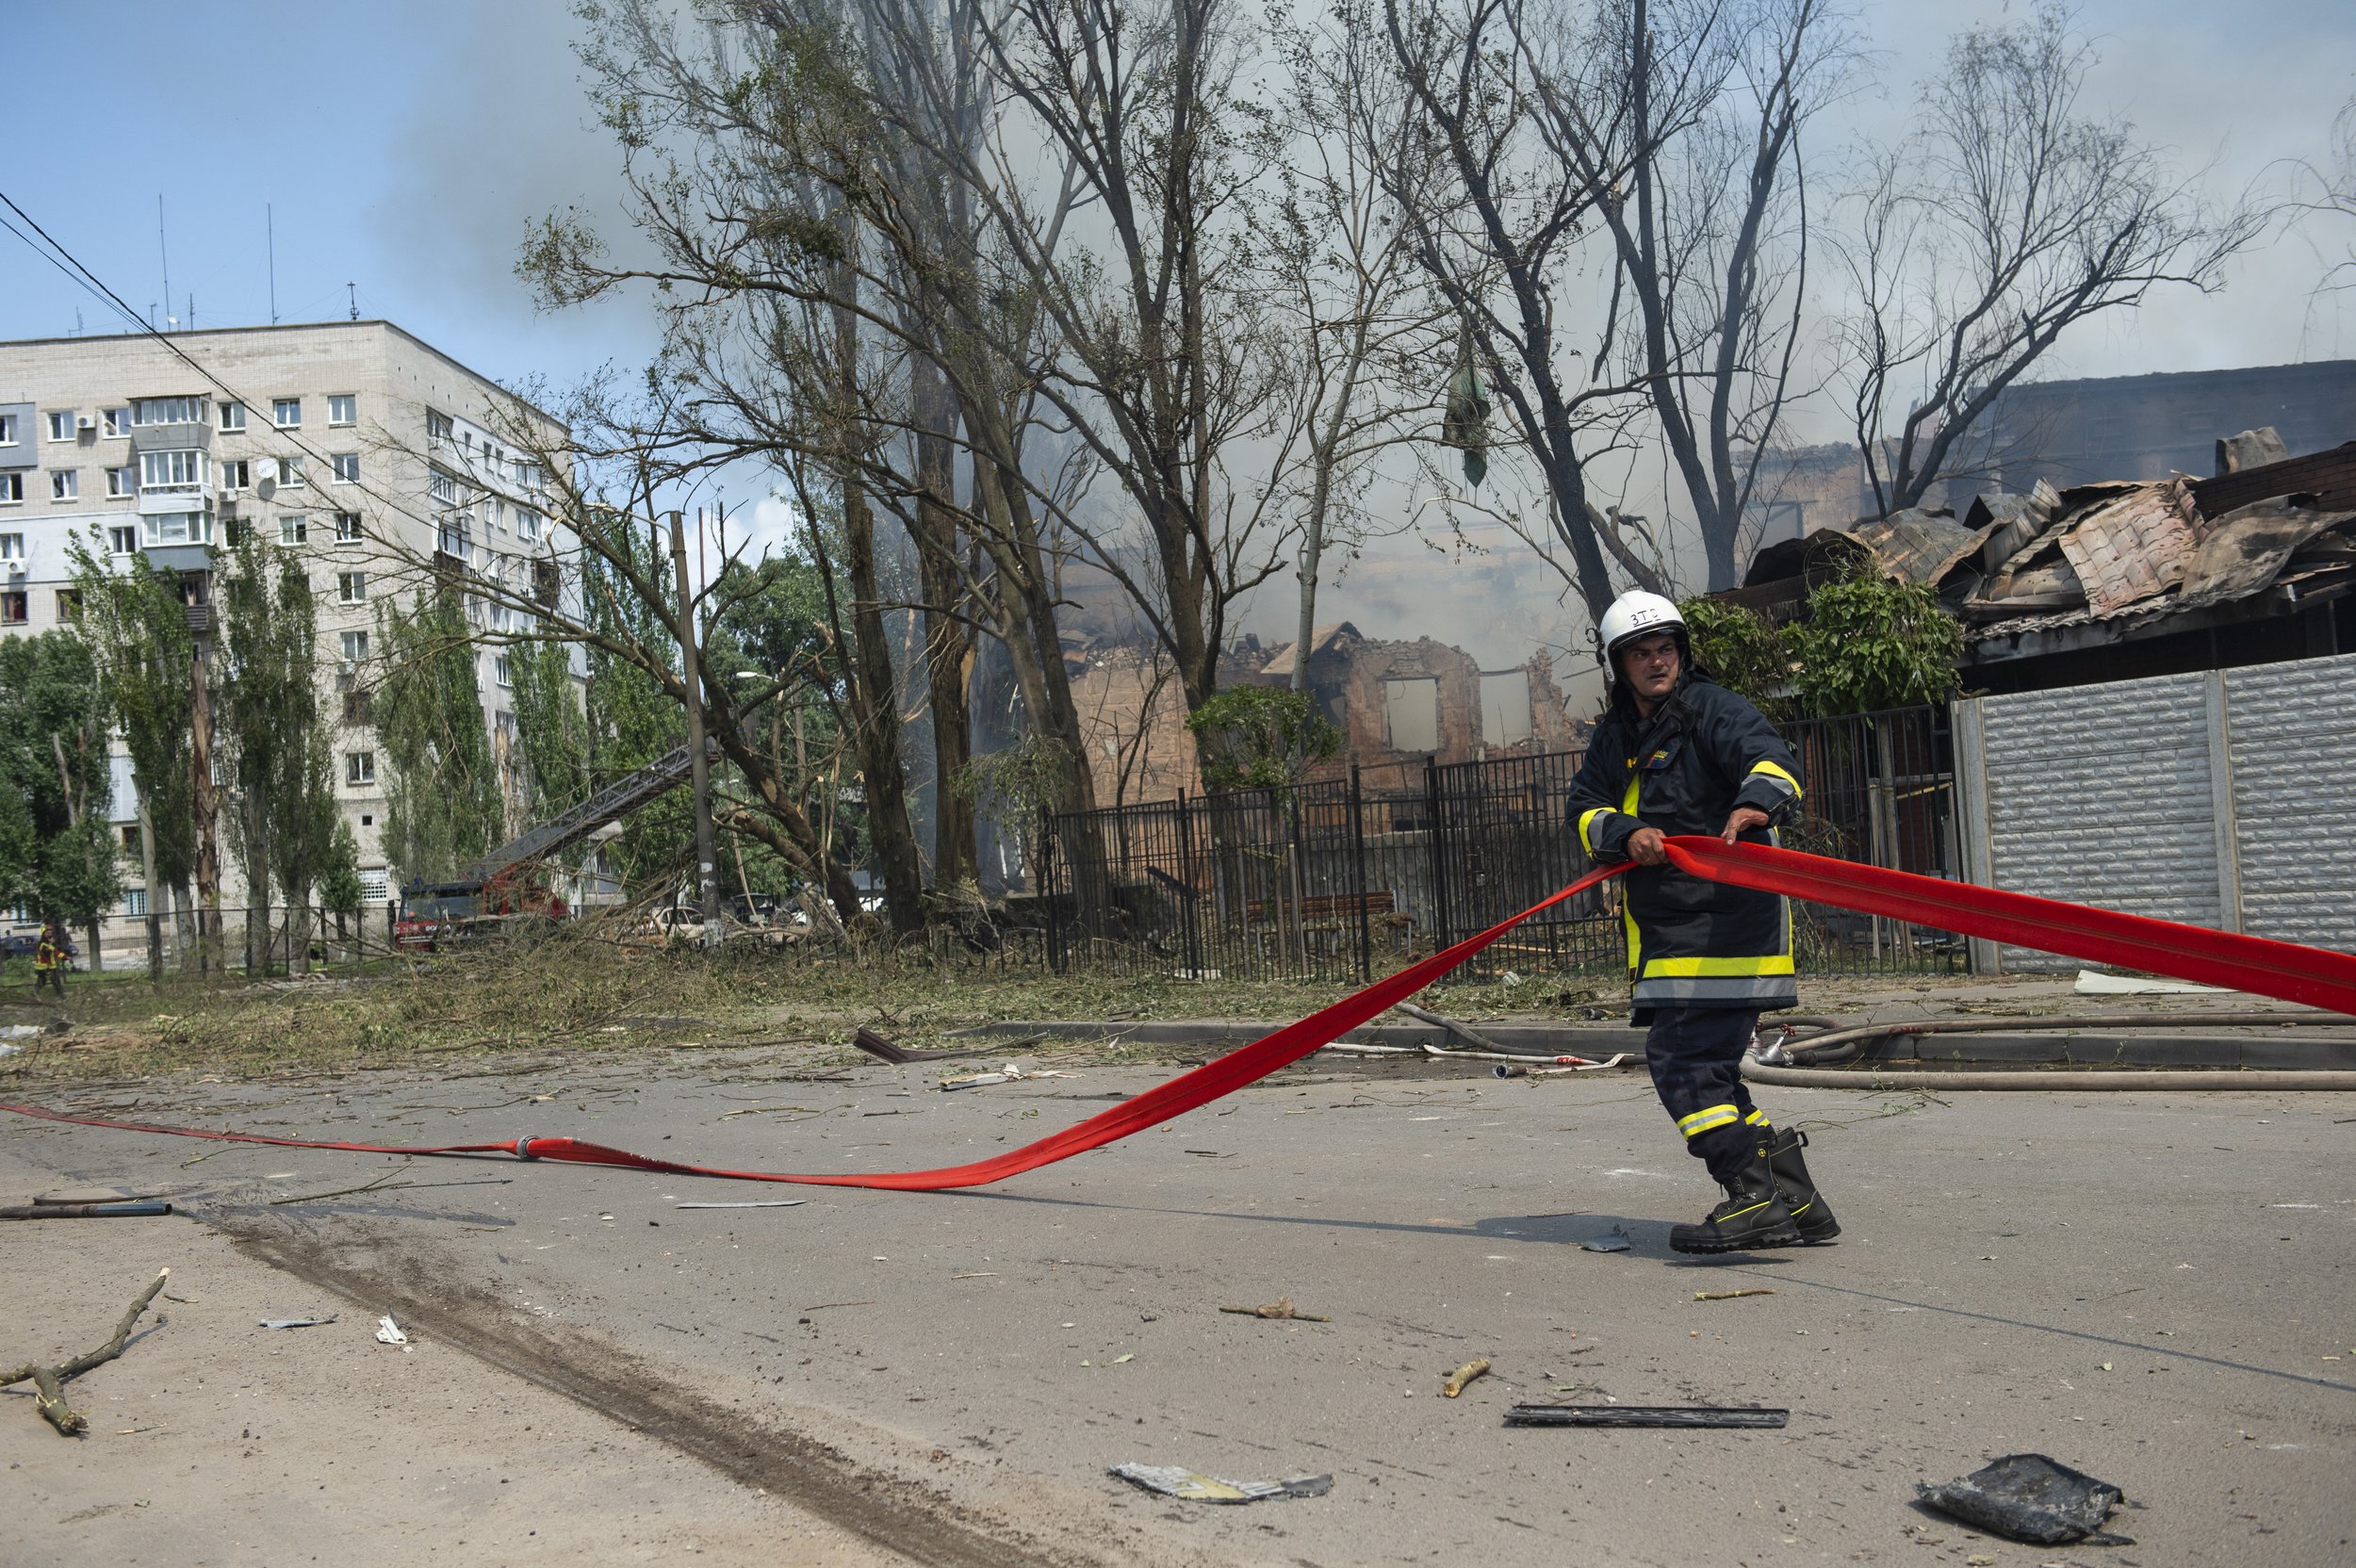  A firefighter runs with a hose towards the scene where a Russian missile struck a clinic in Dnipro killing 6 on May 26, 2023. Cities like Dnipro continue to be a prime target for the Russian military despite being far from the frontlines. 